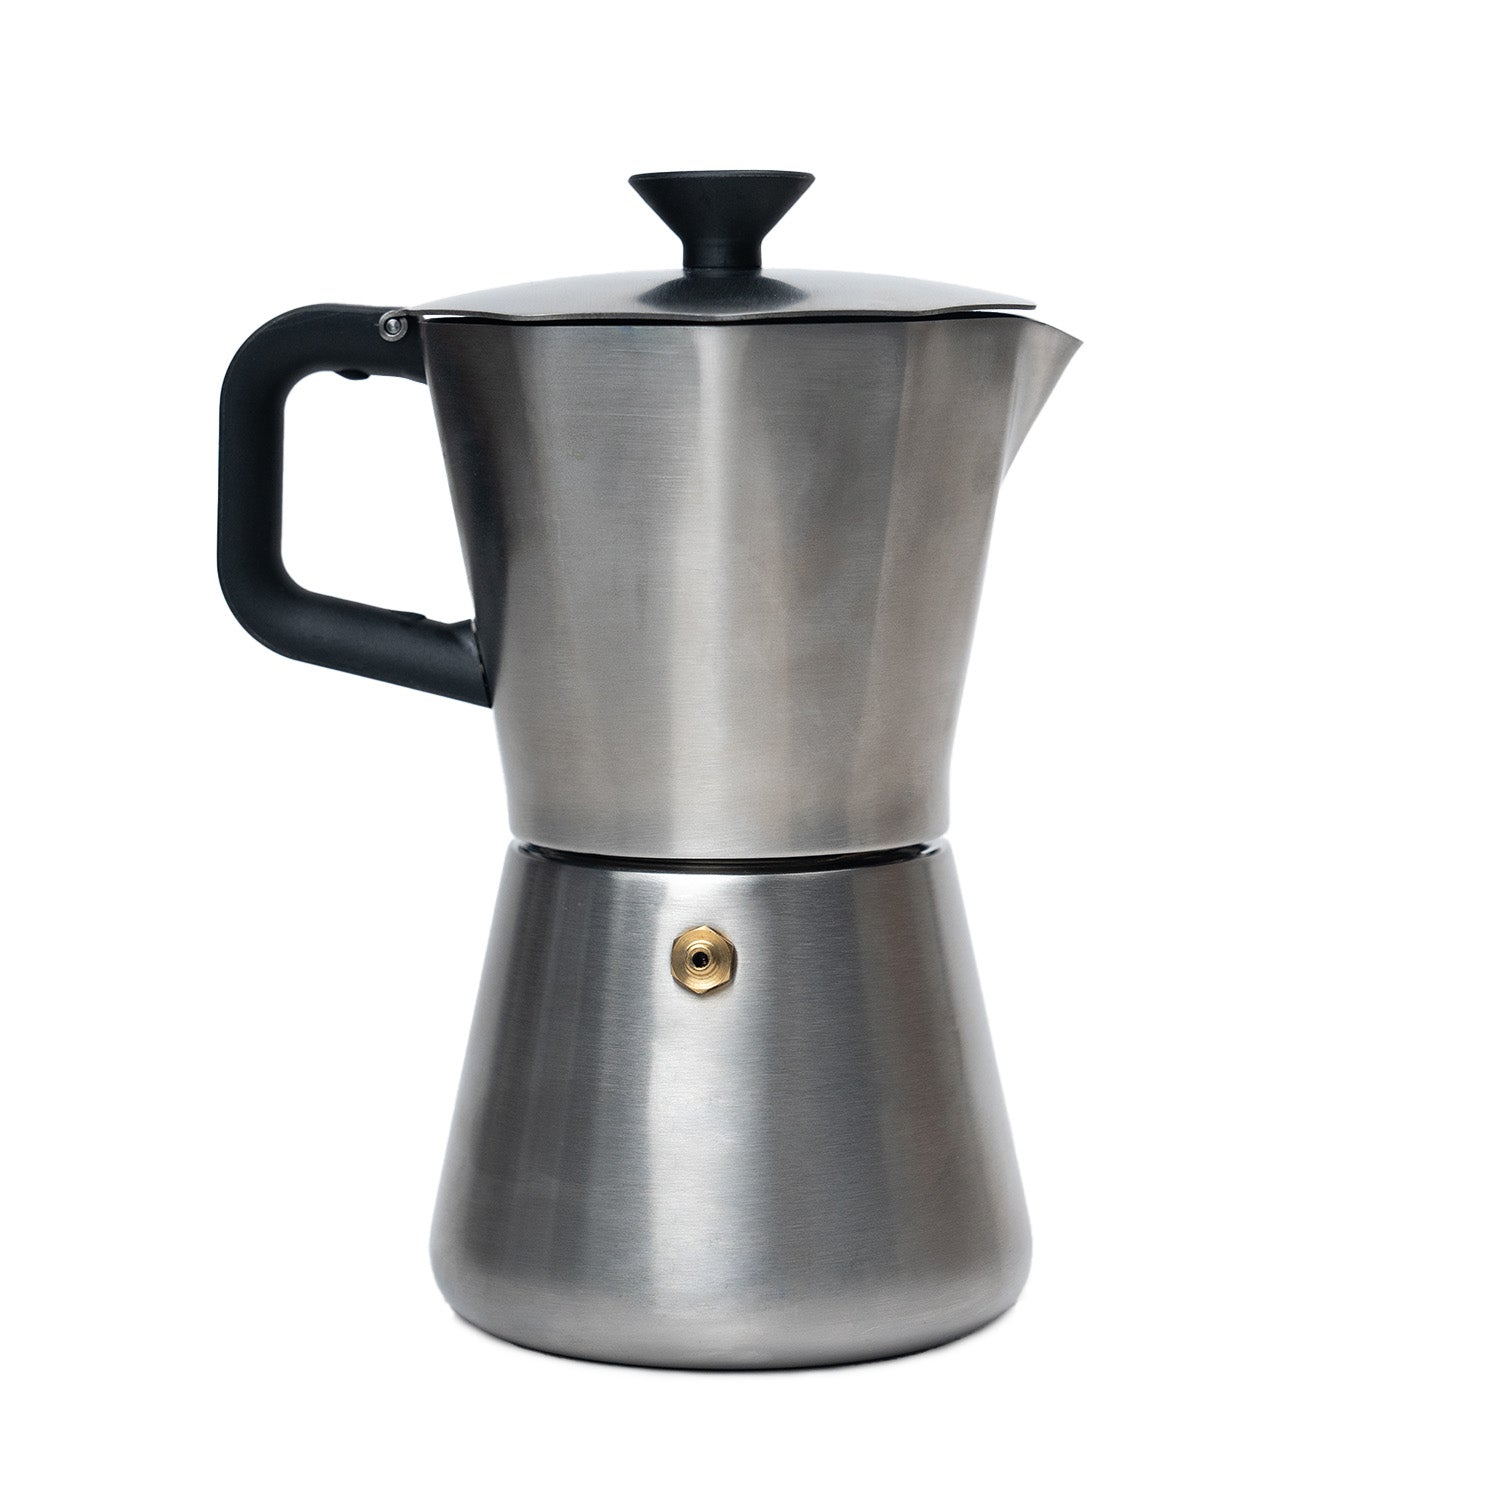 Glass top stove top coffee maker, 4 cup stainless steel coffee